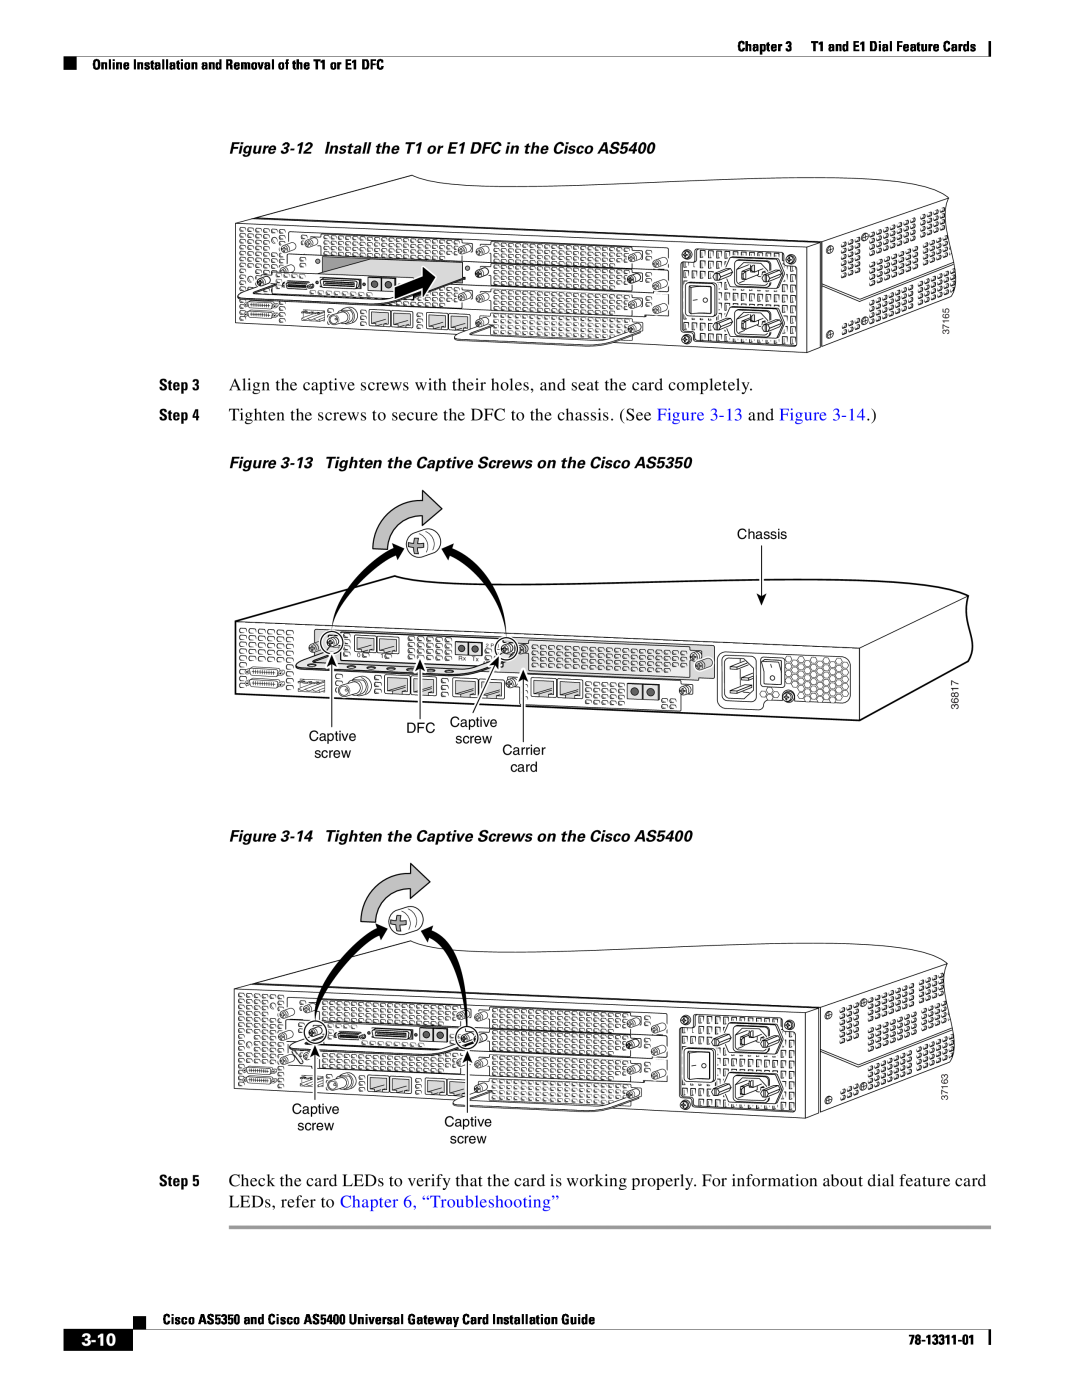 Cisco Systems 3-10, 12 Install the T1 or E1 DFC in the Cisco AS5400, 13 Tighten the Captive Screws on the Cisco AS5350 